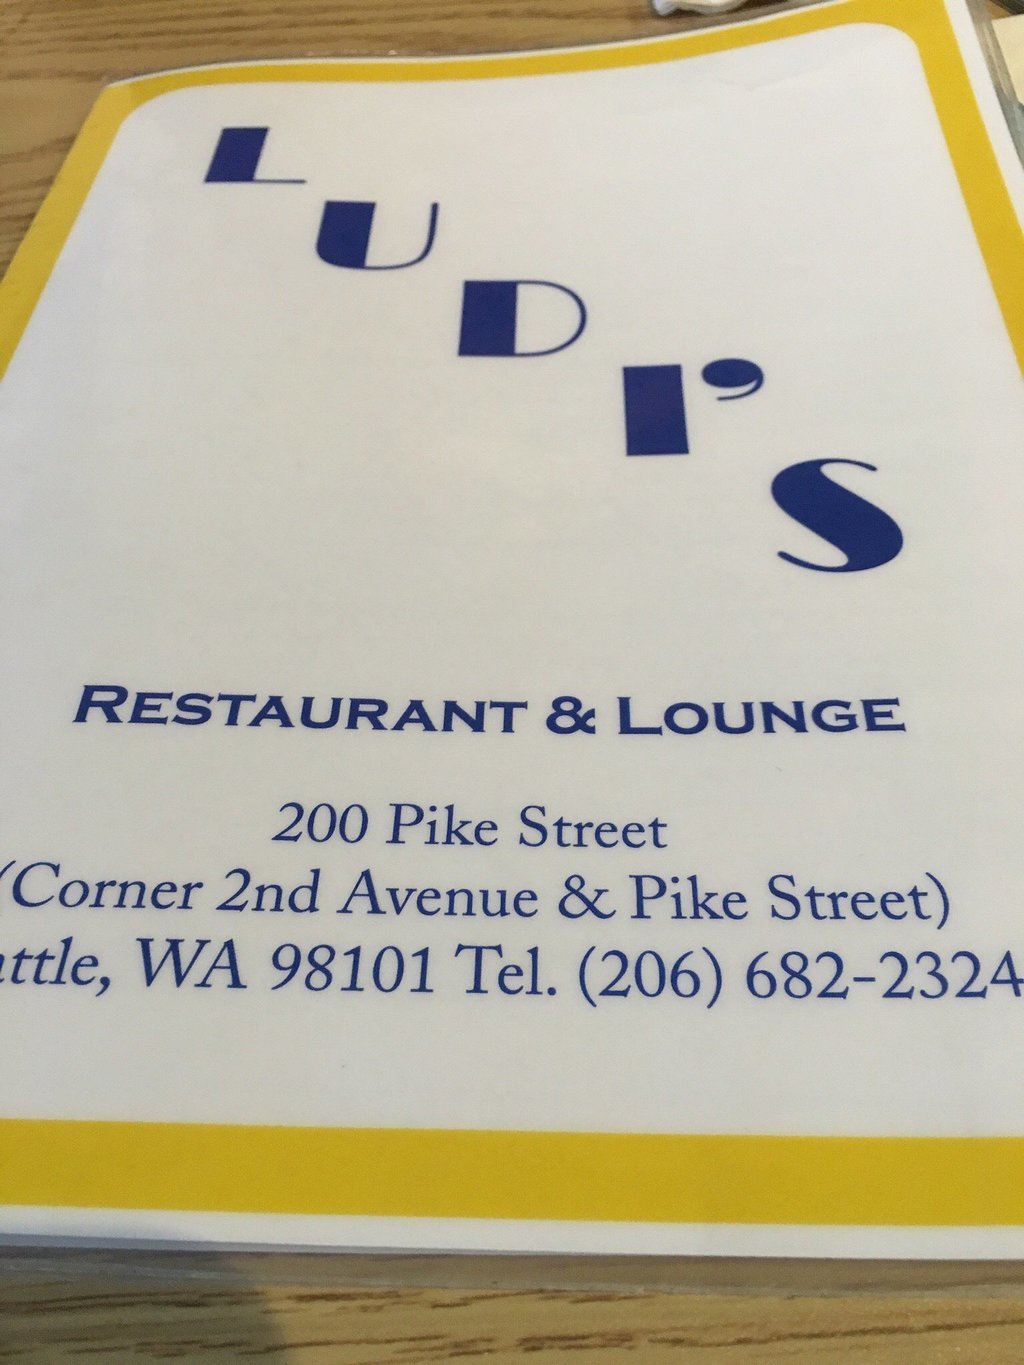 Ludi`s Restaurant and Lounge